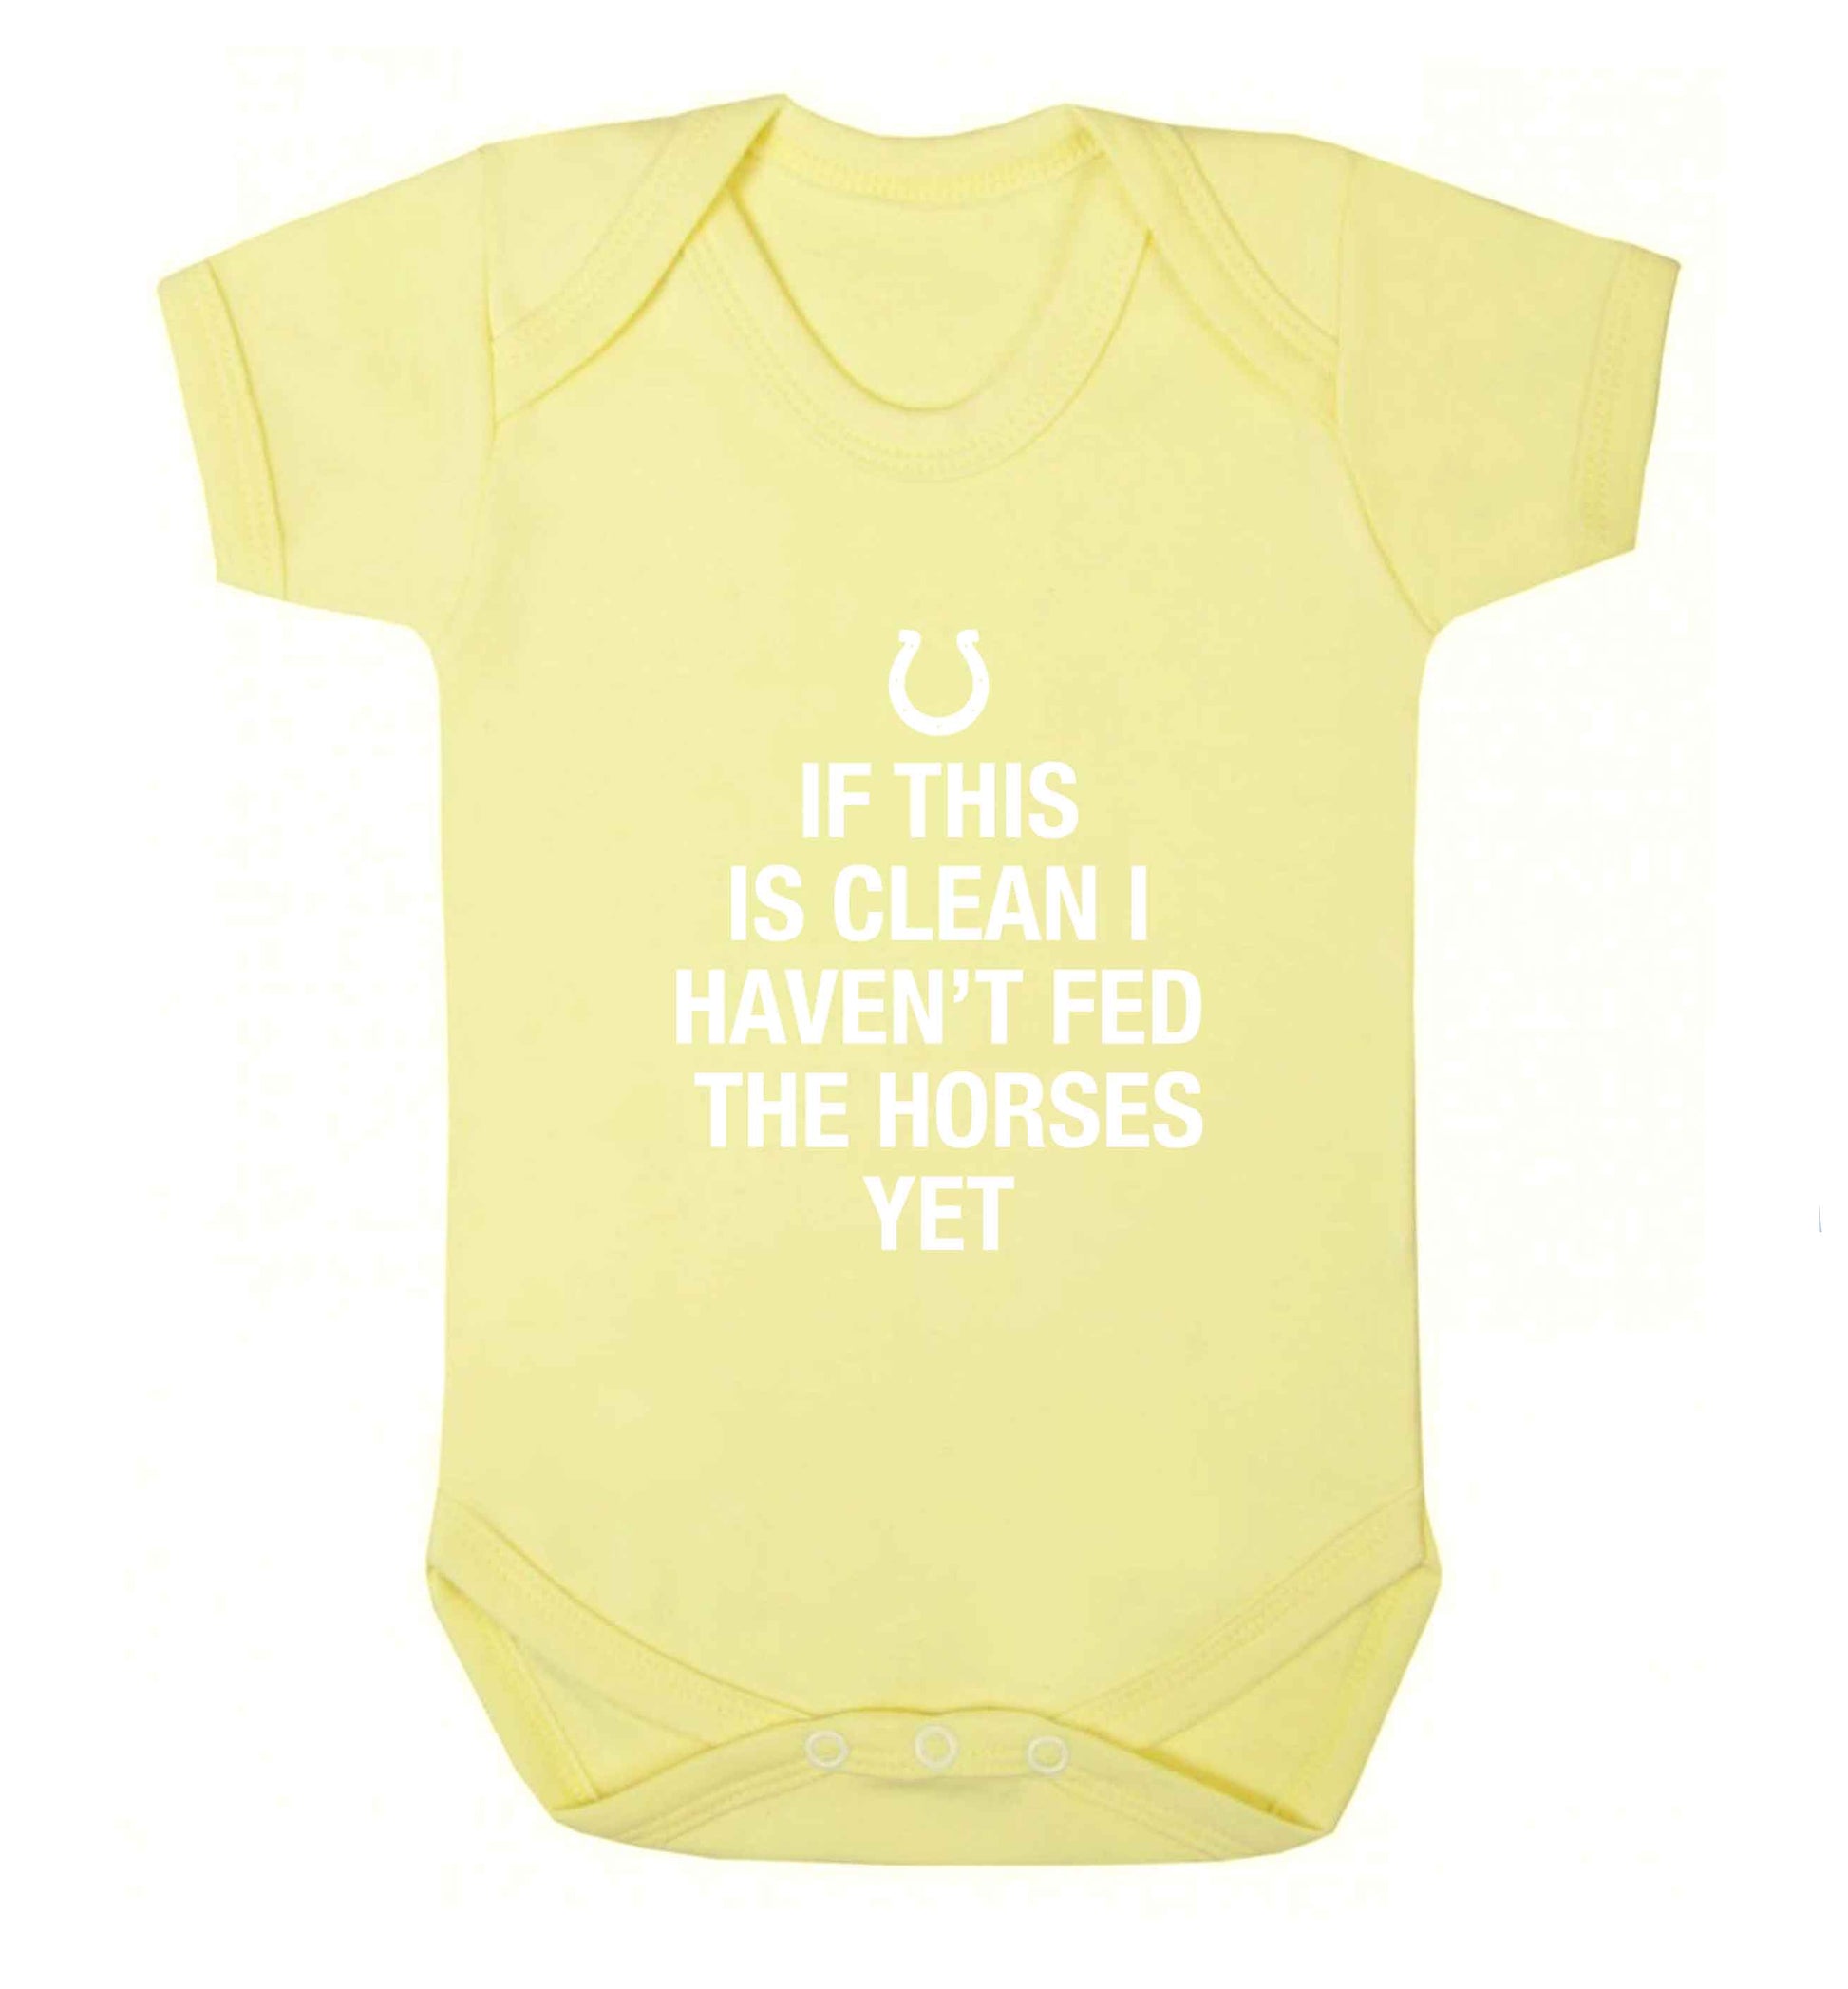 If this isn't clean I haven't fed the horses yet baby vest pale yellow 18-24 months